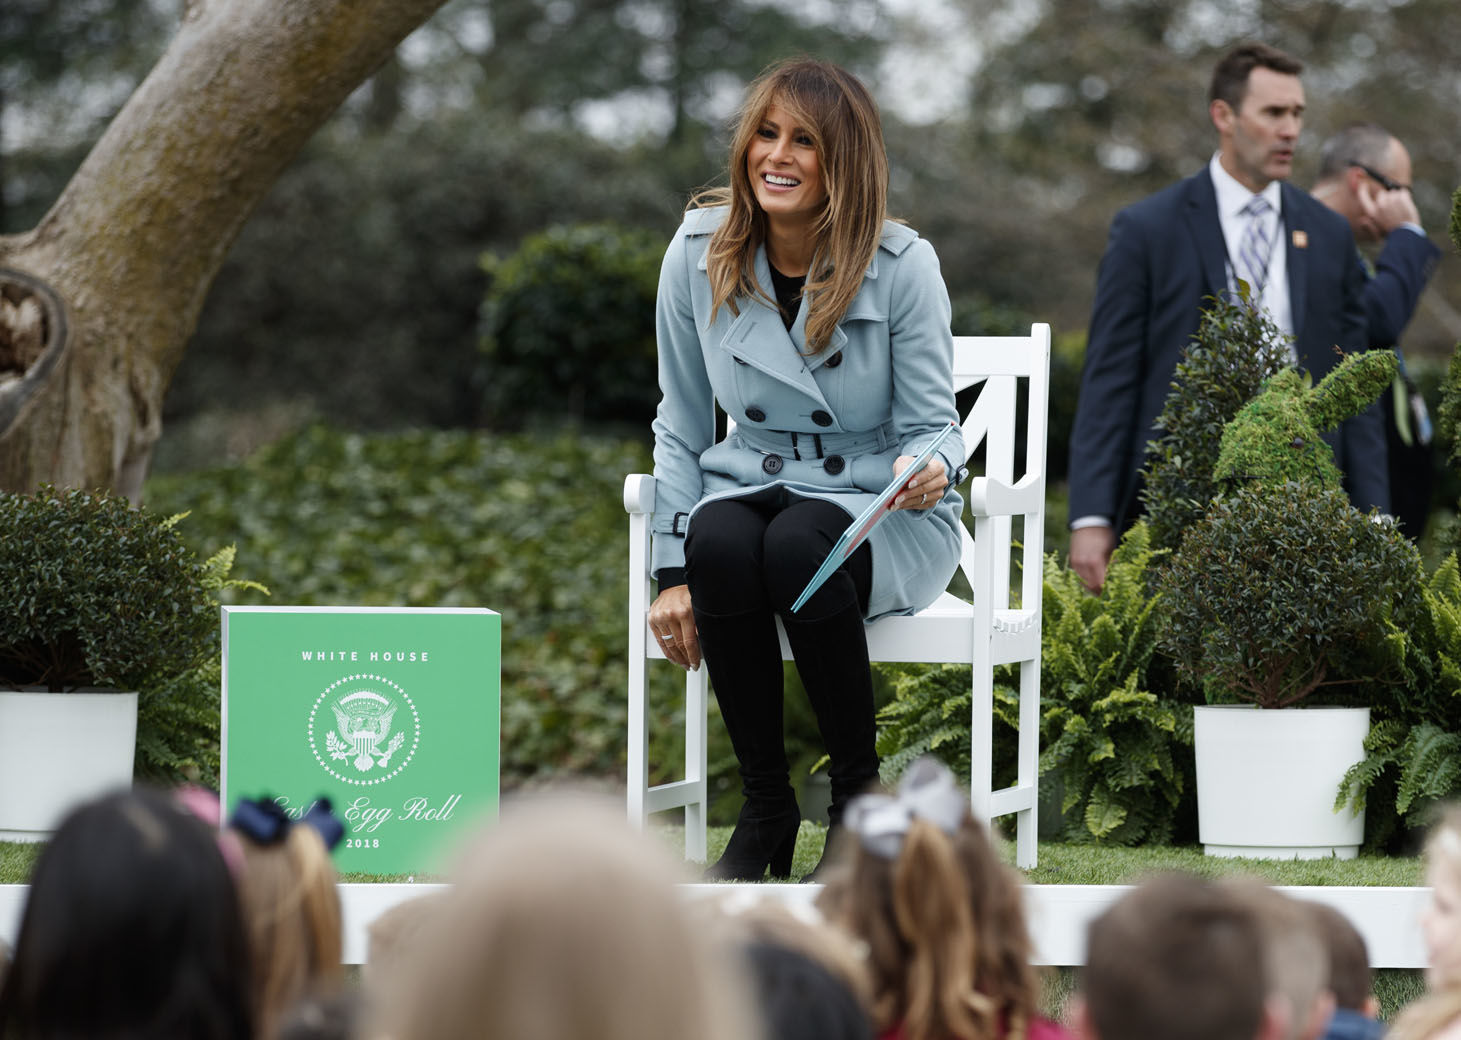 First lady Melania Trump arrives to read from the book "You!" By Sandra Magsamen at the White House in Washington, Monday, April 2, 2018, during the annual White House Easter Egg Roll. (AP Photo/Carolyn Kaster)